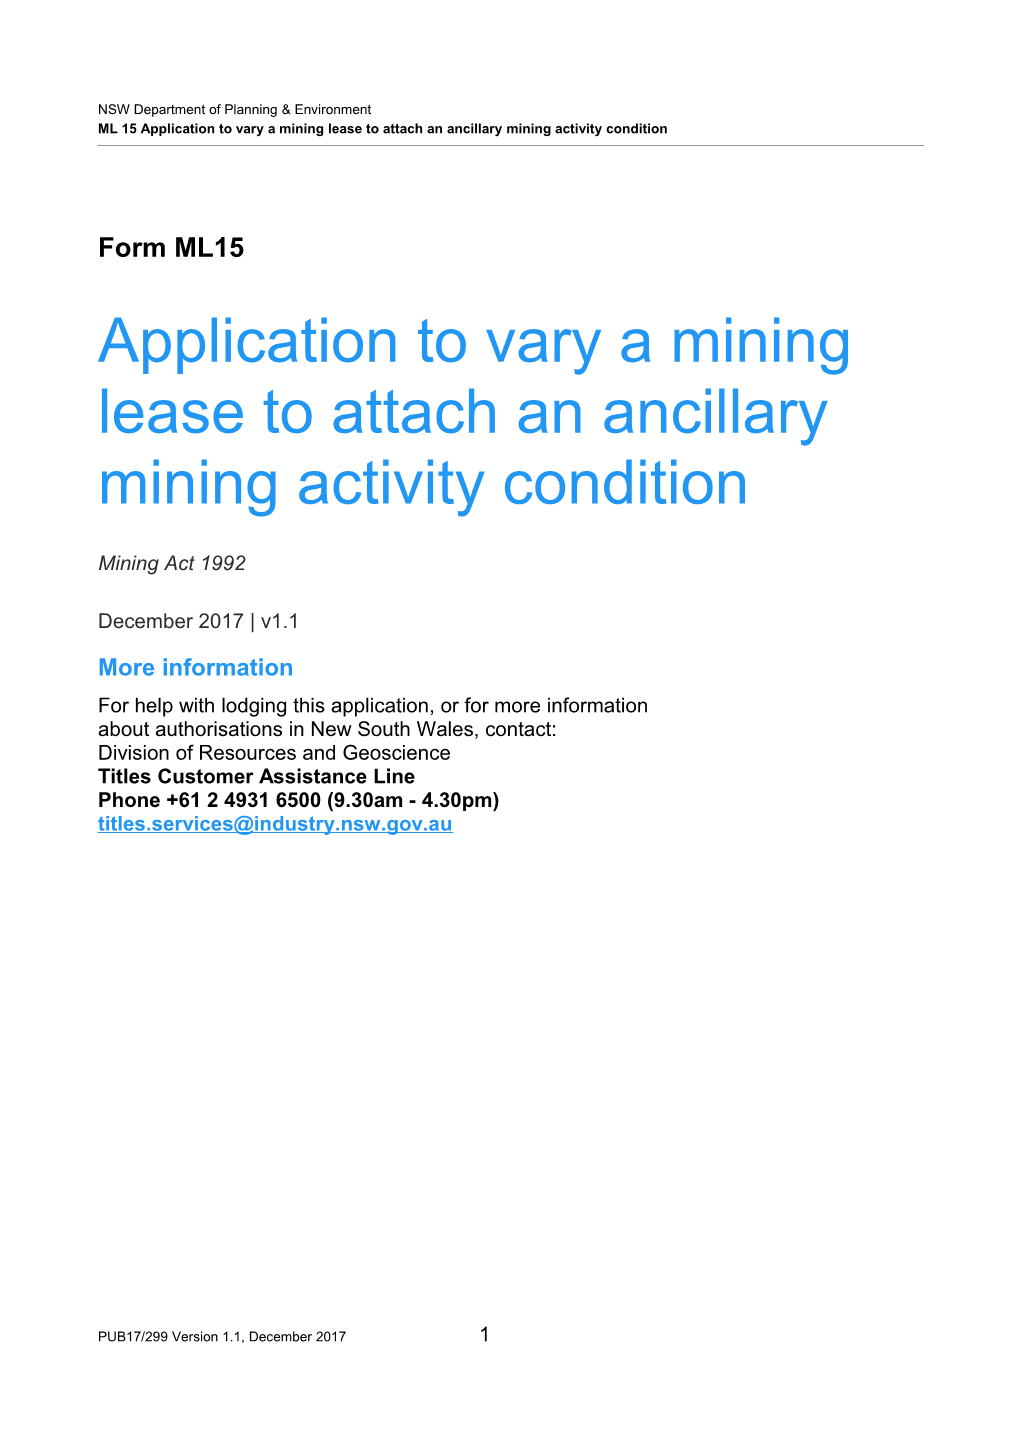 ML 15 Application to Vary a Mining Lease to Attach an Ancillary Mining Activity Condition